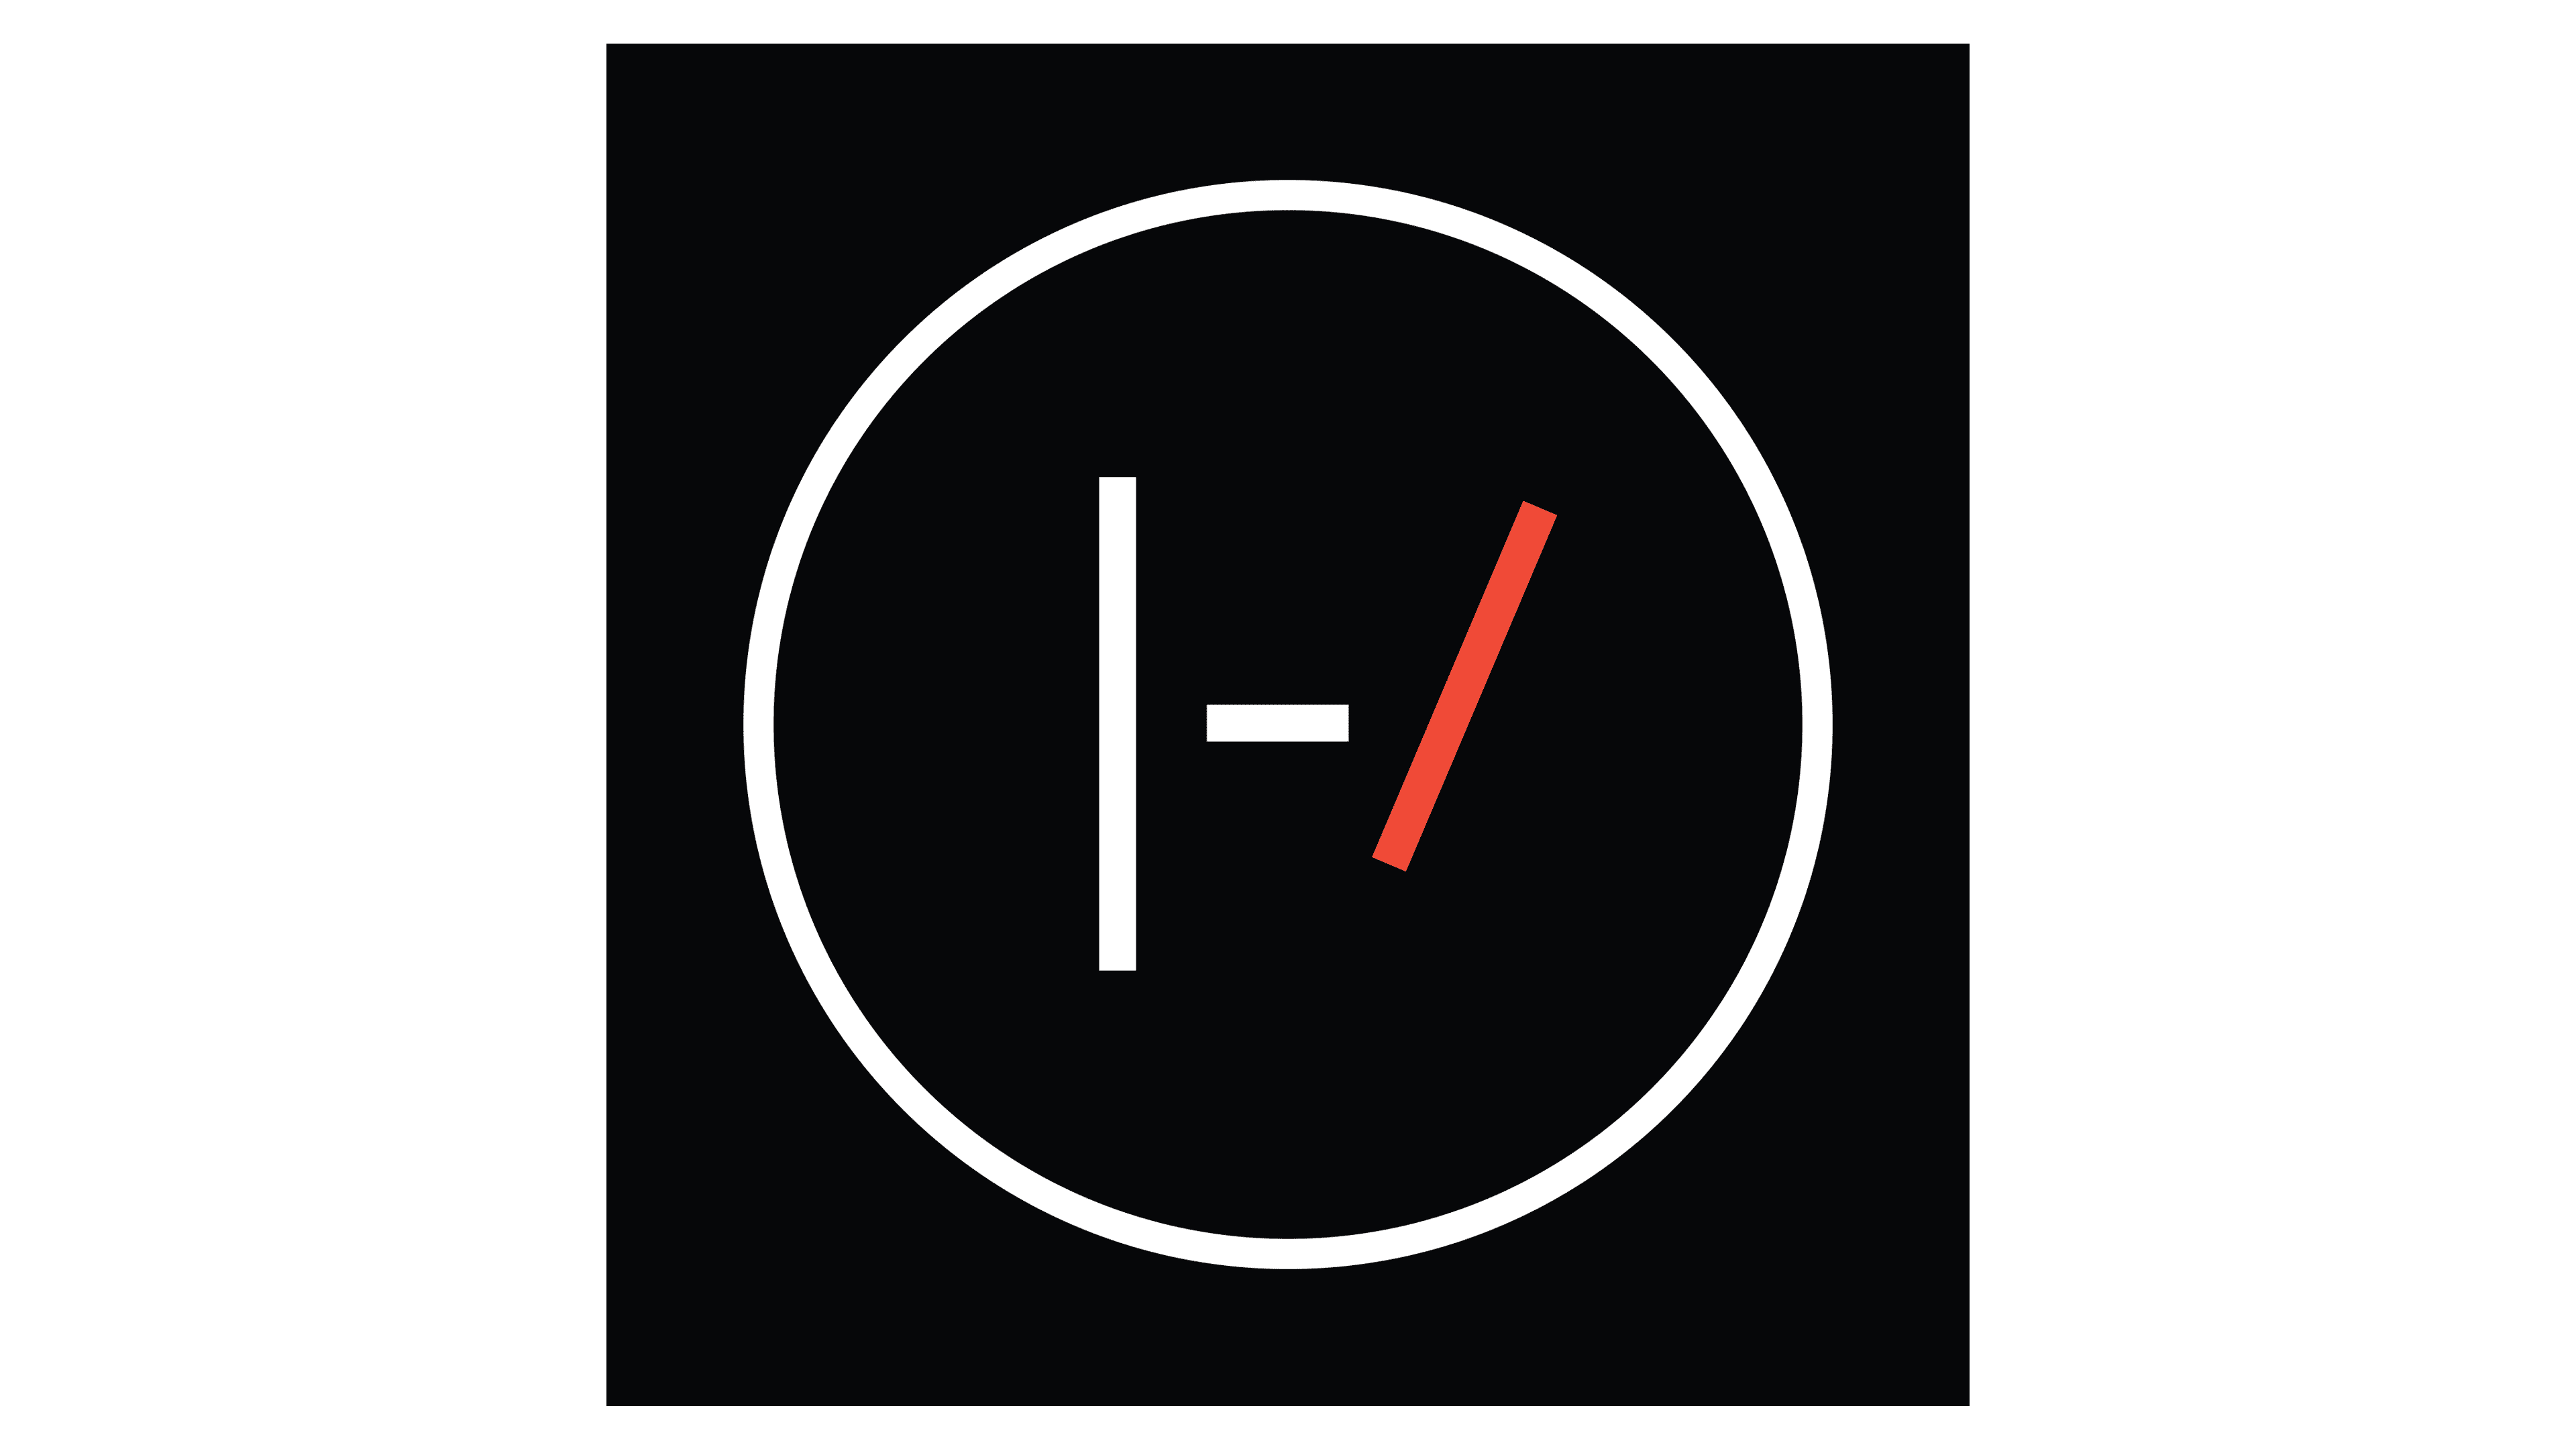 Twenty One Pilots Logo The Most Famous Brands And Company Logos In The World